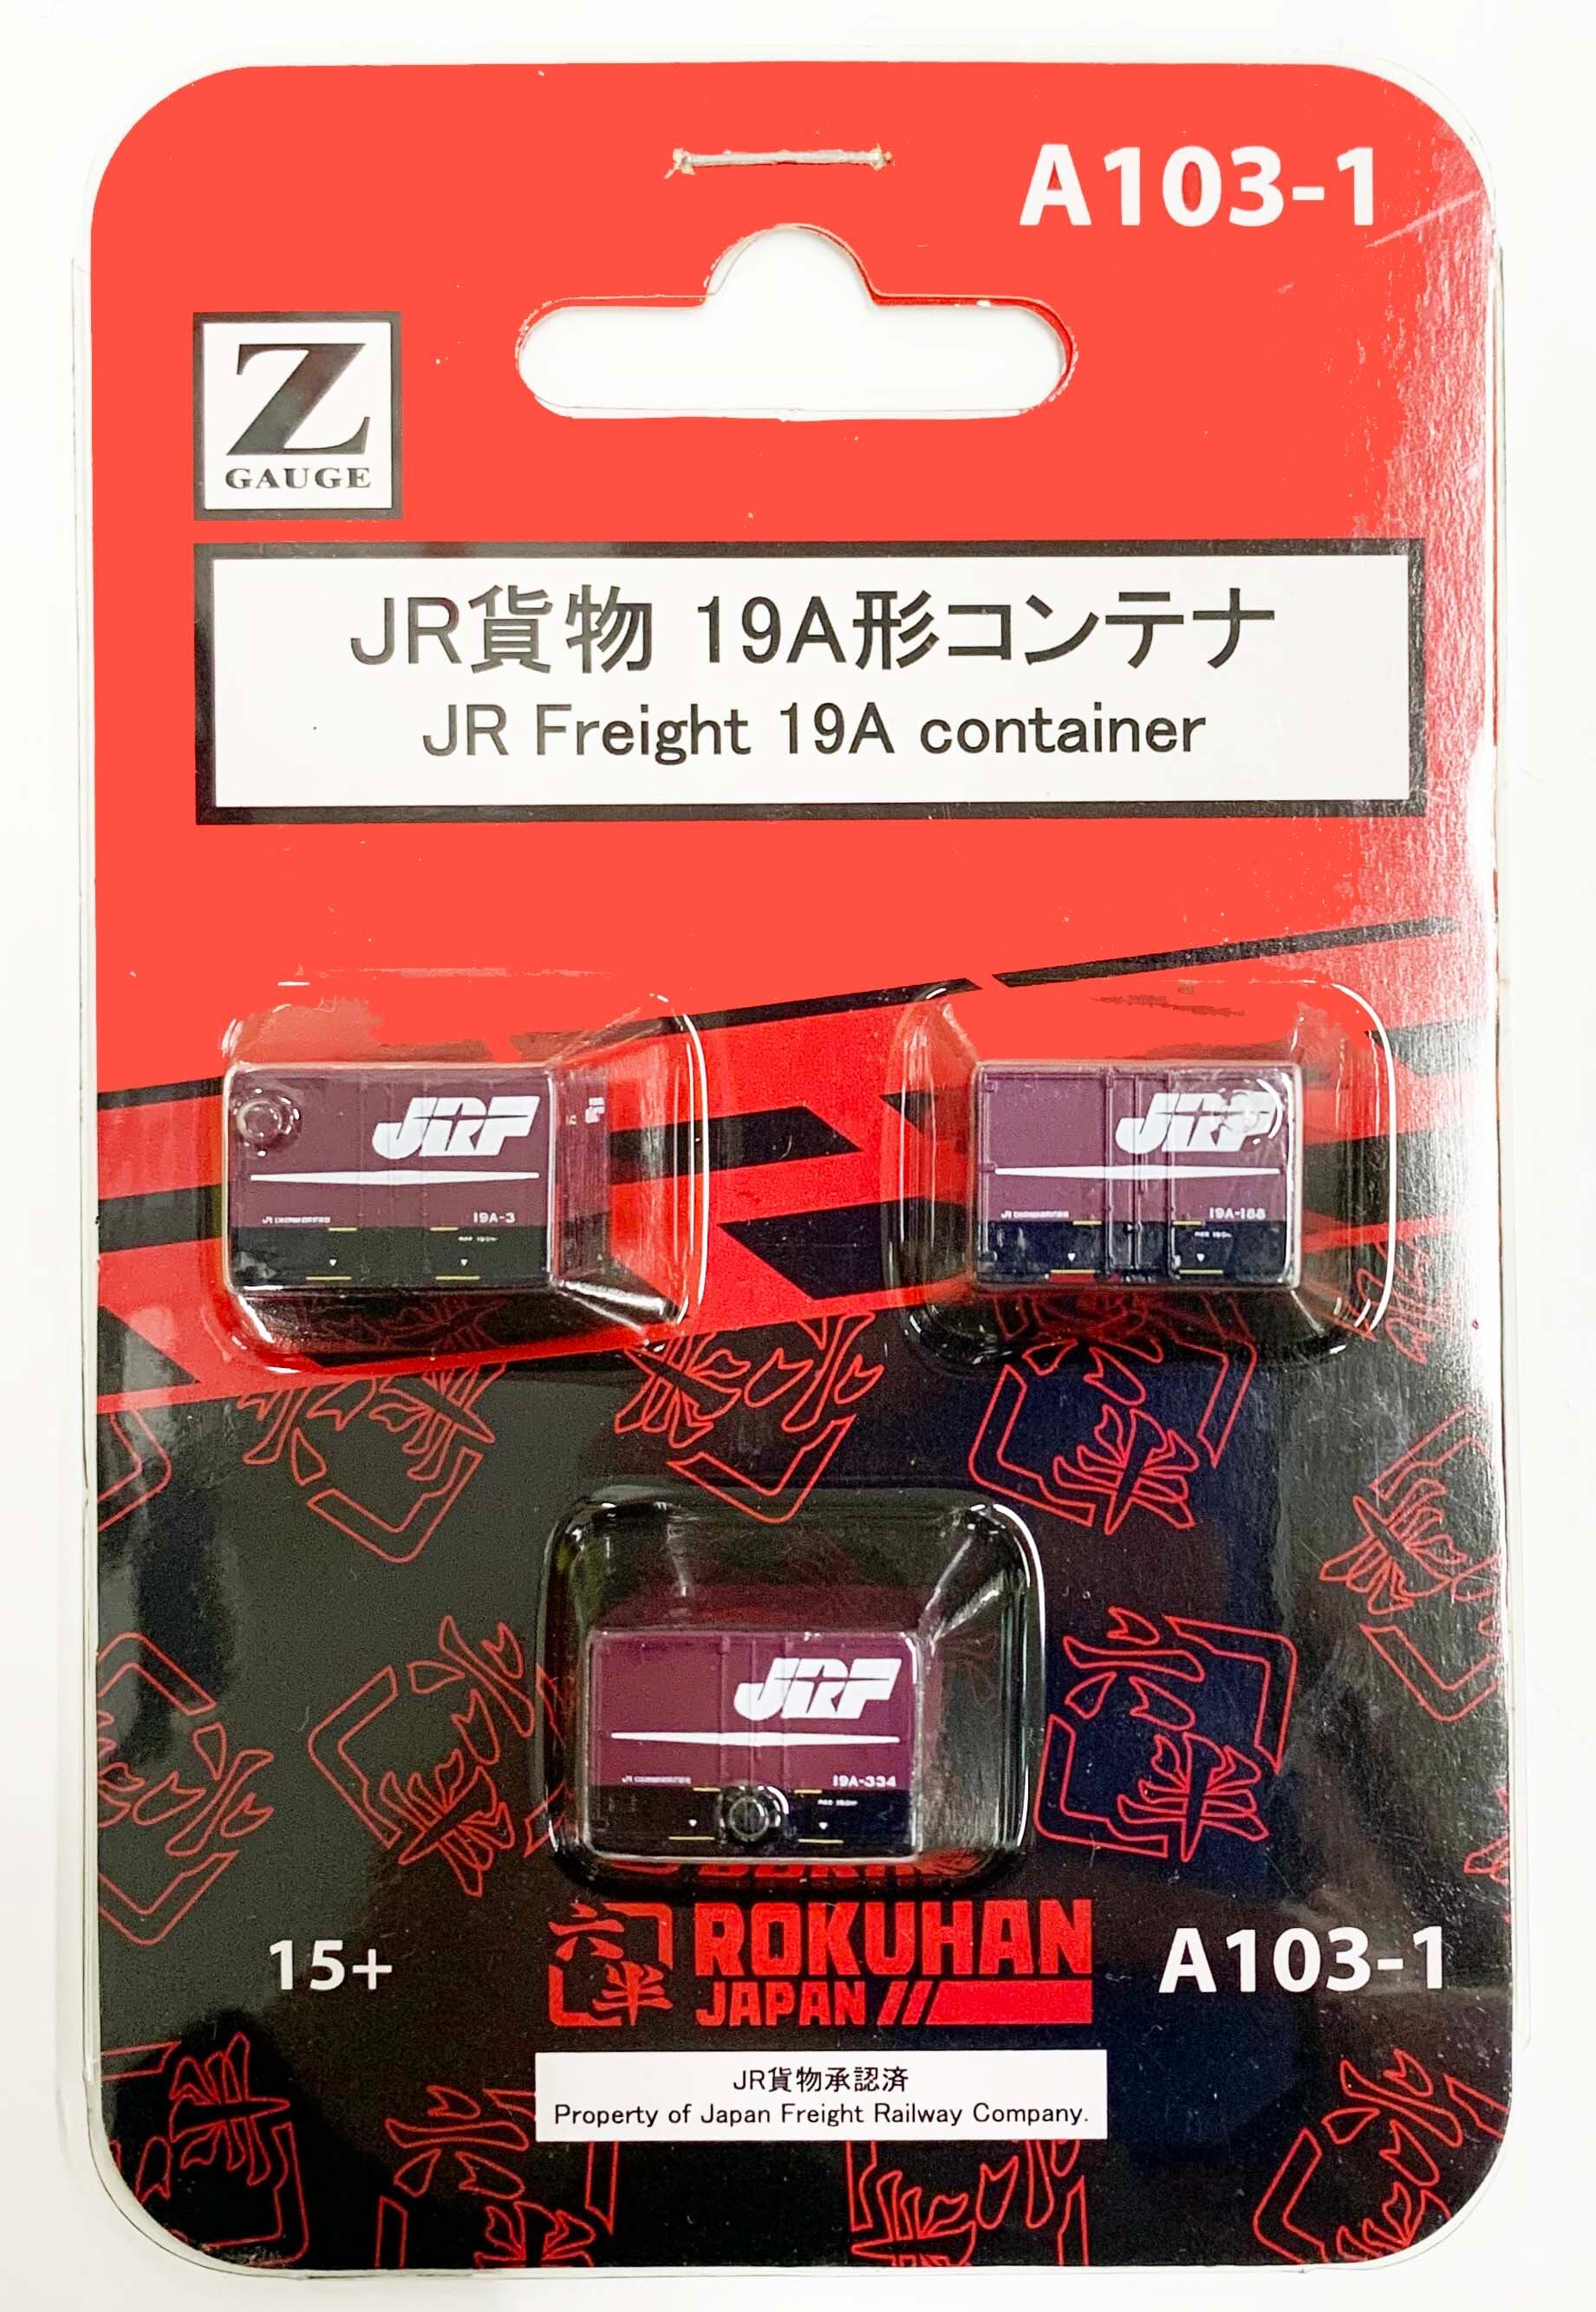 A103-1 JR貨物 19A形コンテナ (JR Freight 19A container) | ロクハン